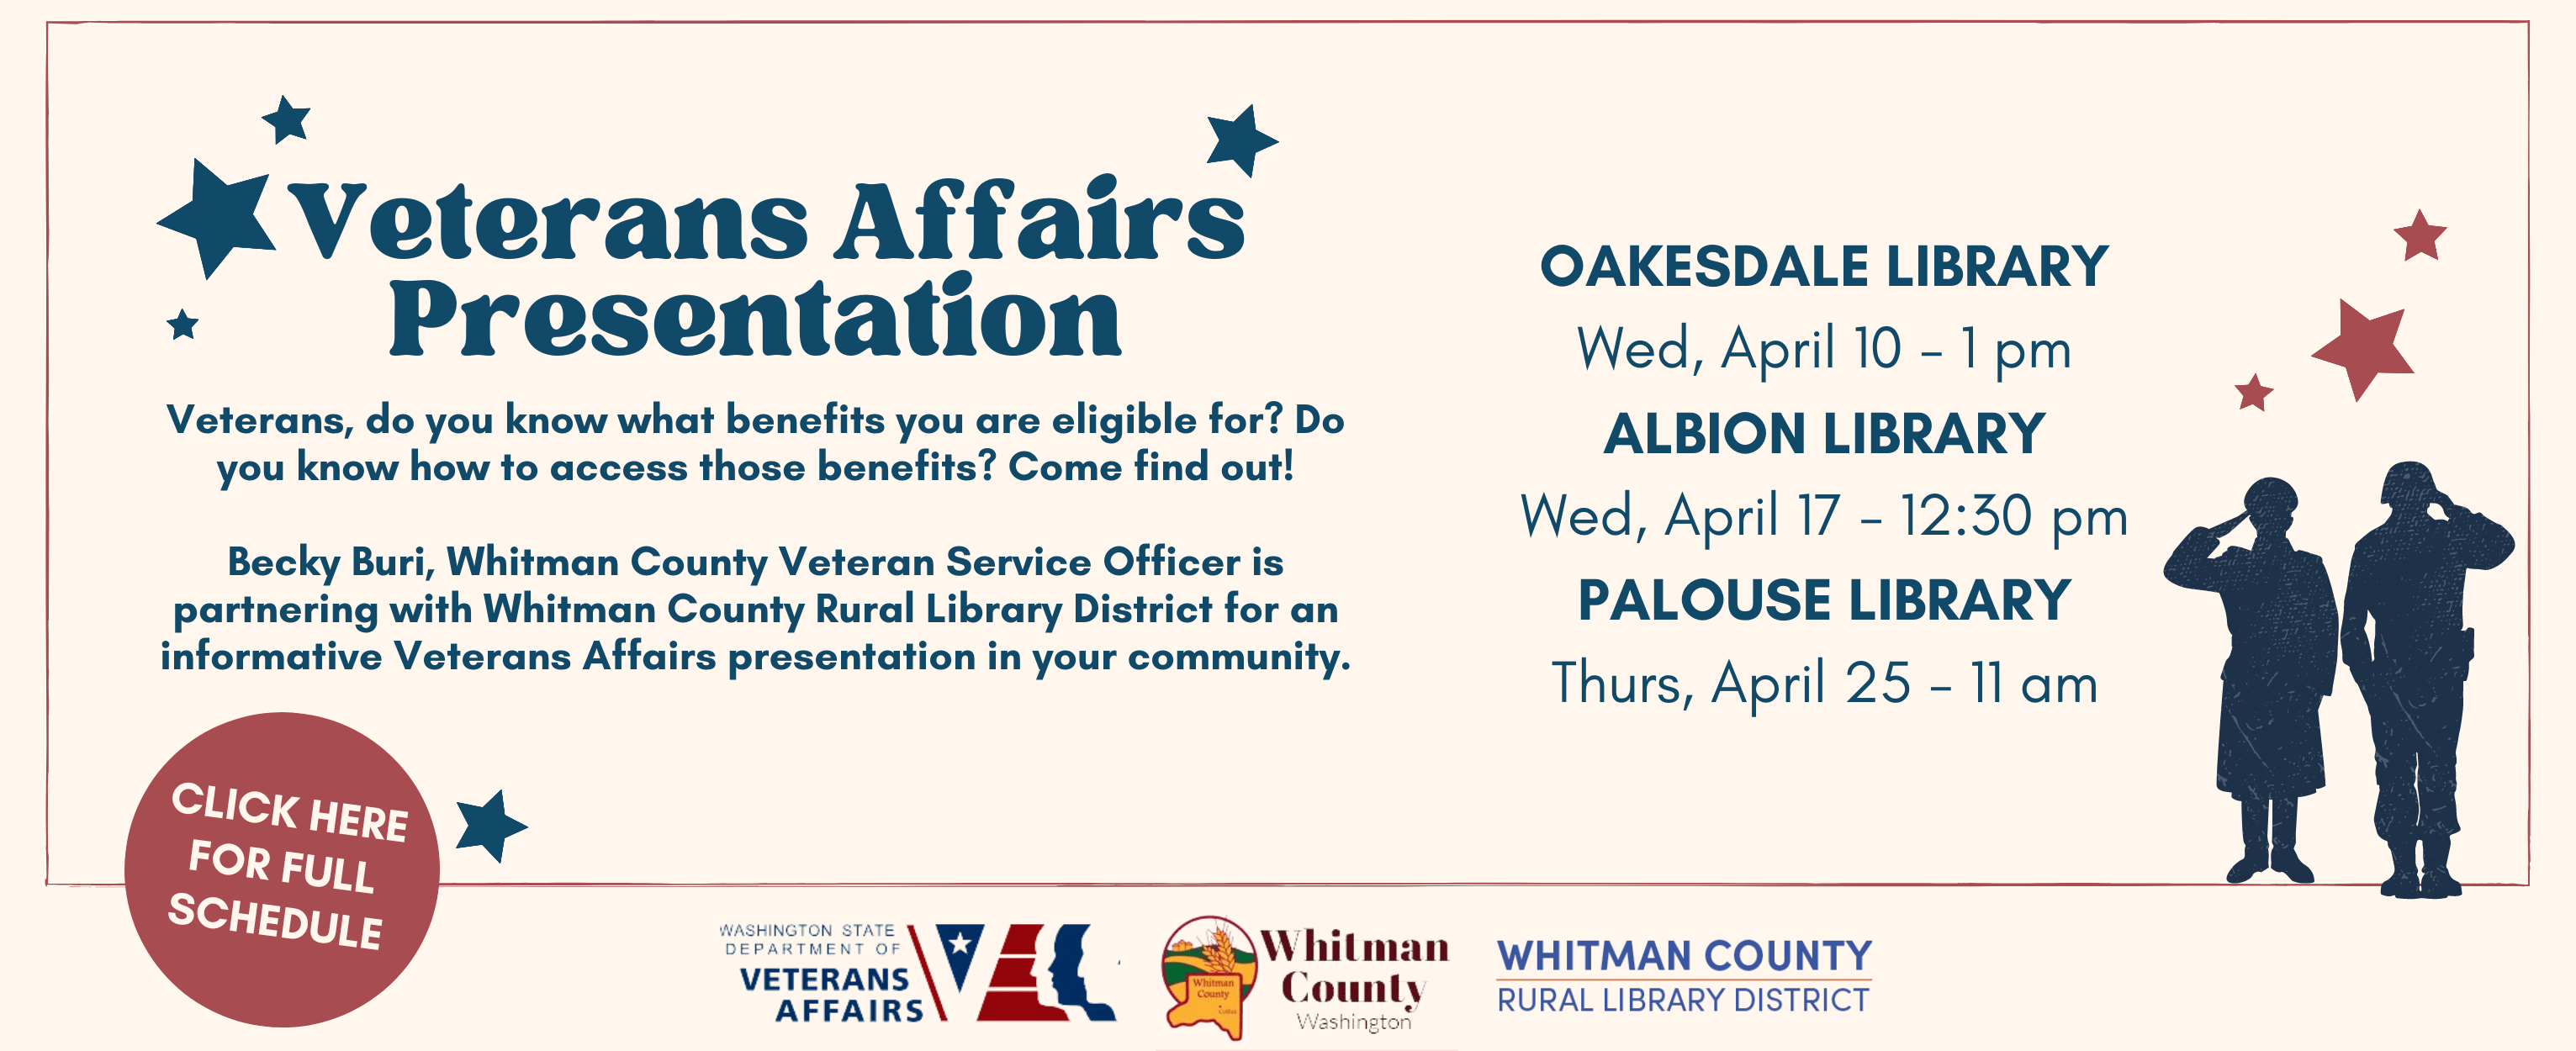 Becky Buri, Whitman County Veteran Service Officer is partnering with Whitman County Rural Library District for an informative Veterans Affairs presentation in your community. Click here for the full schedule of her tour.